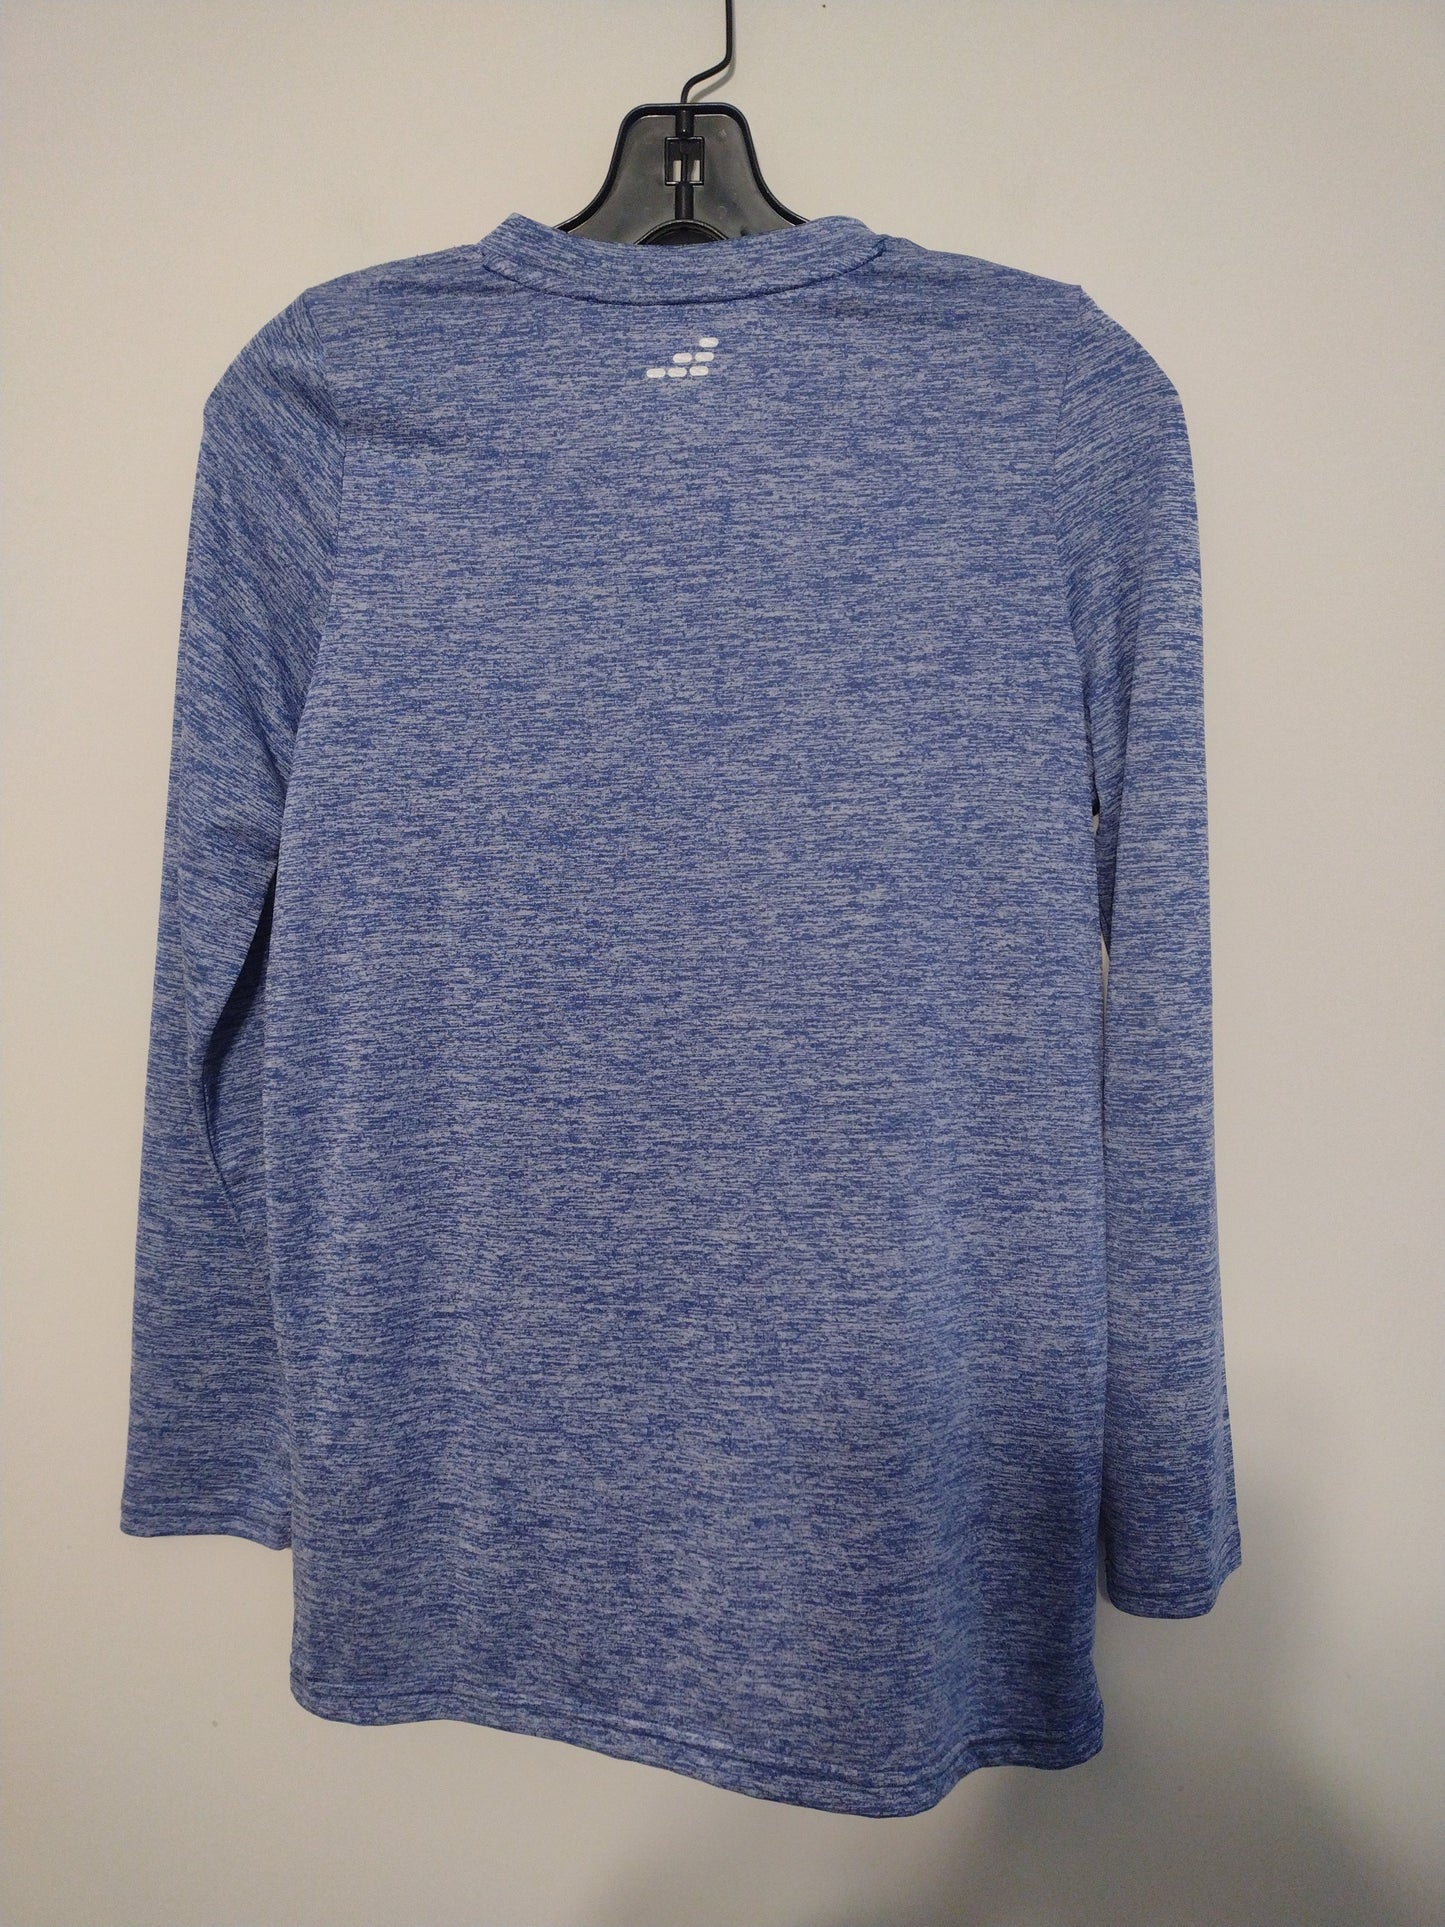 Top Long Sleeve By Bcg  Size: Xl